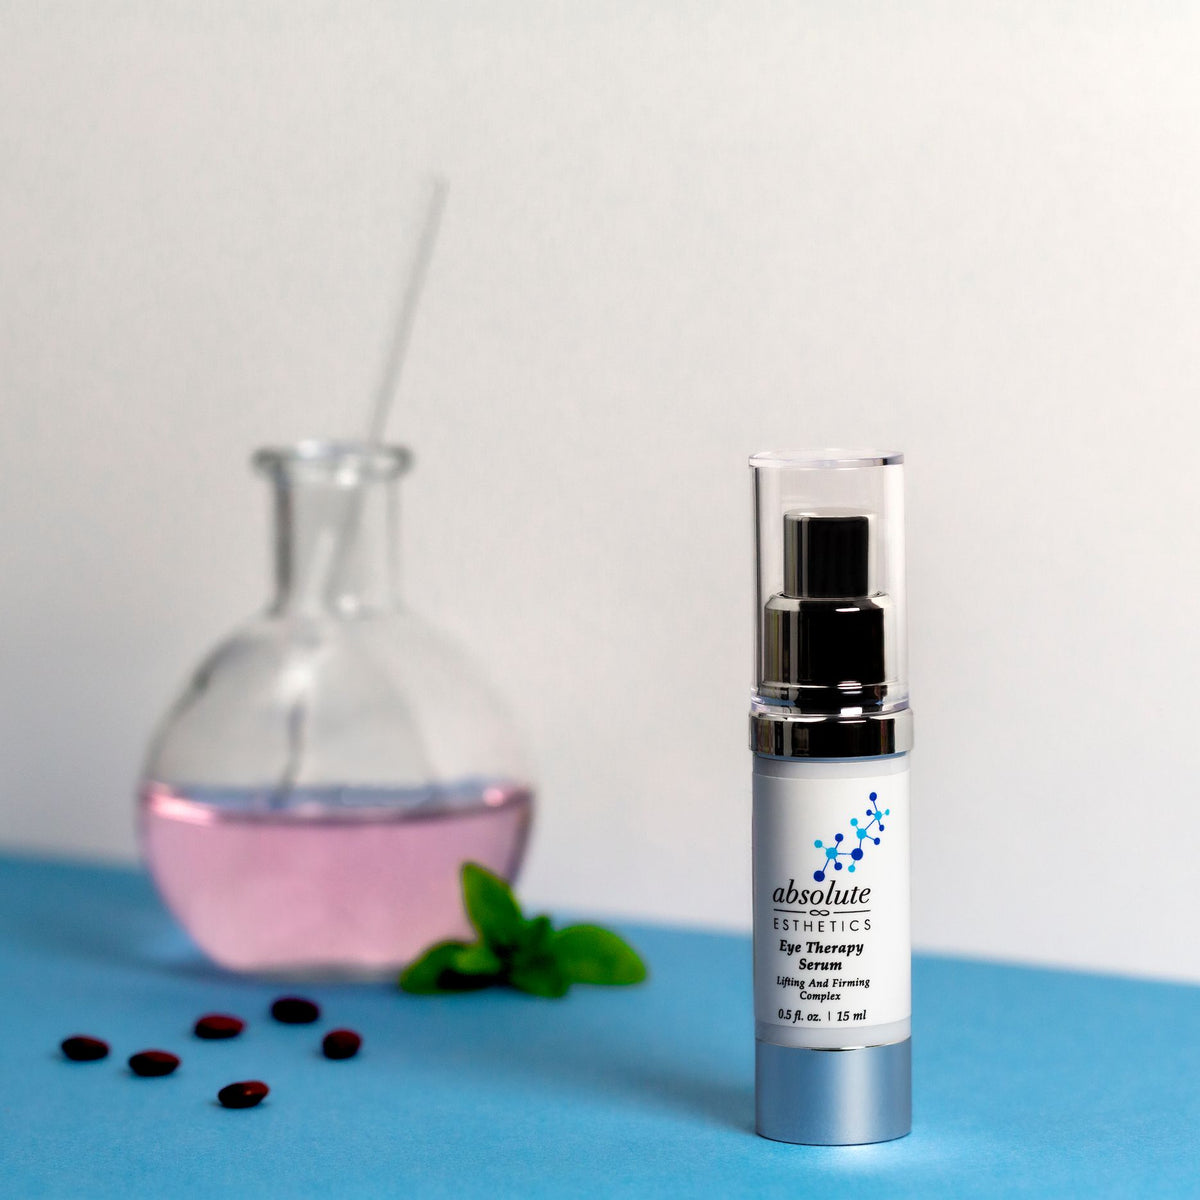 Eye Therapy Serum (Skin Lifting &amp; Firming Complex)